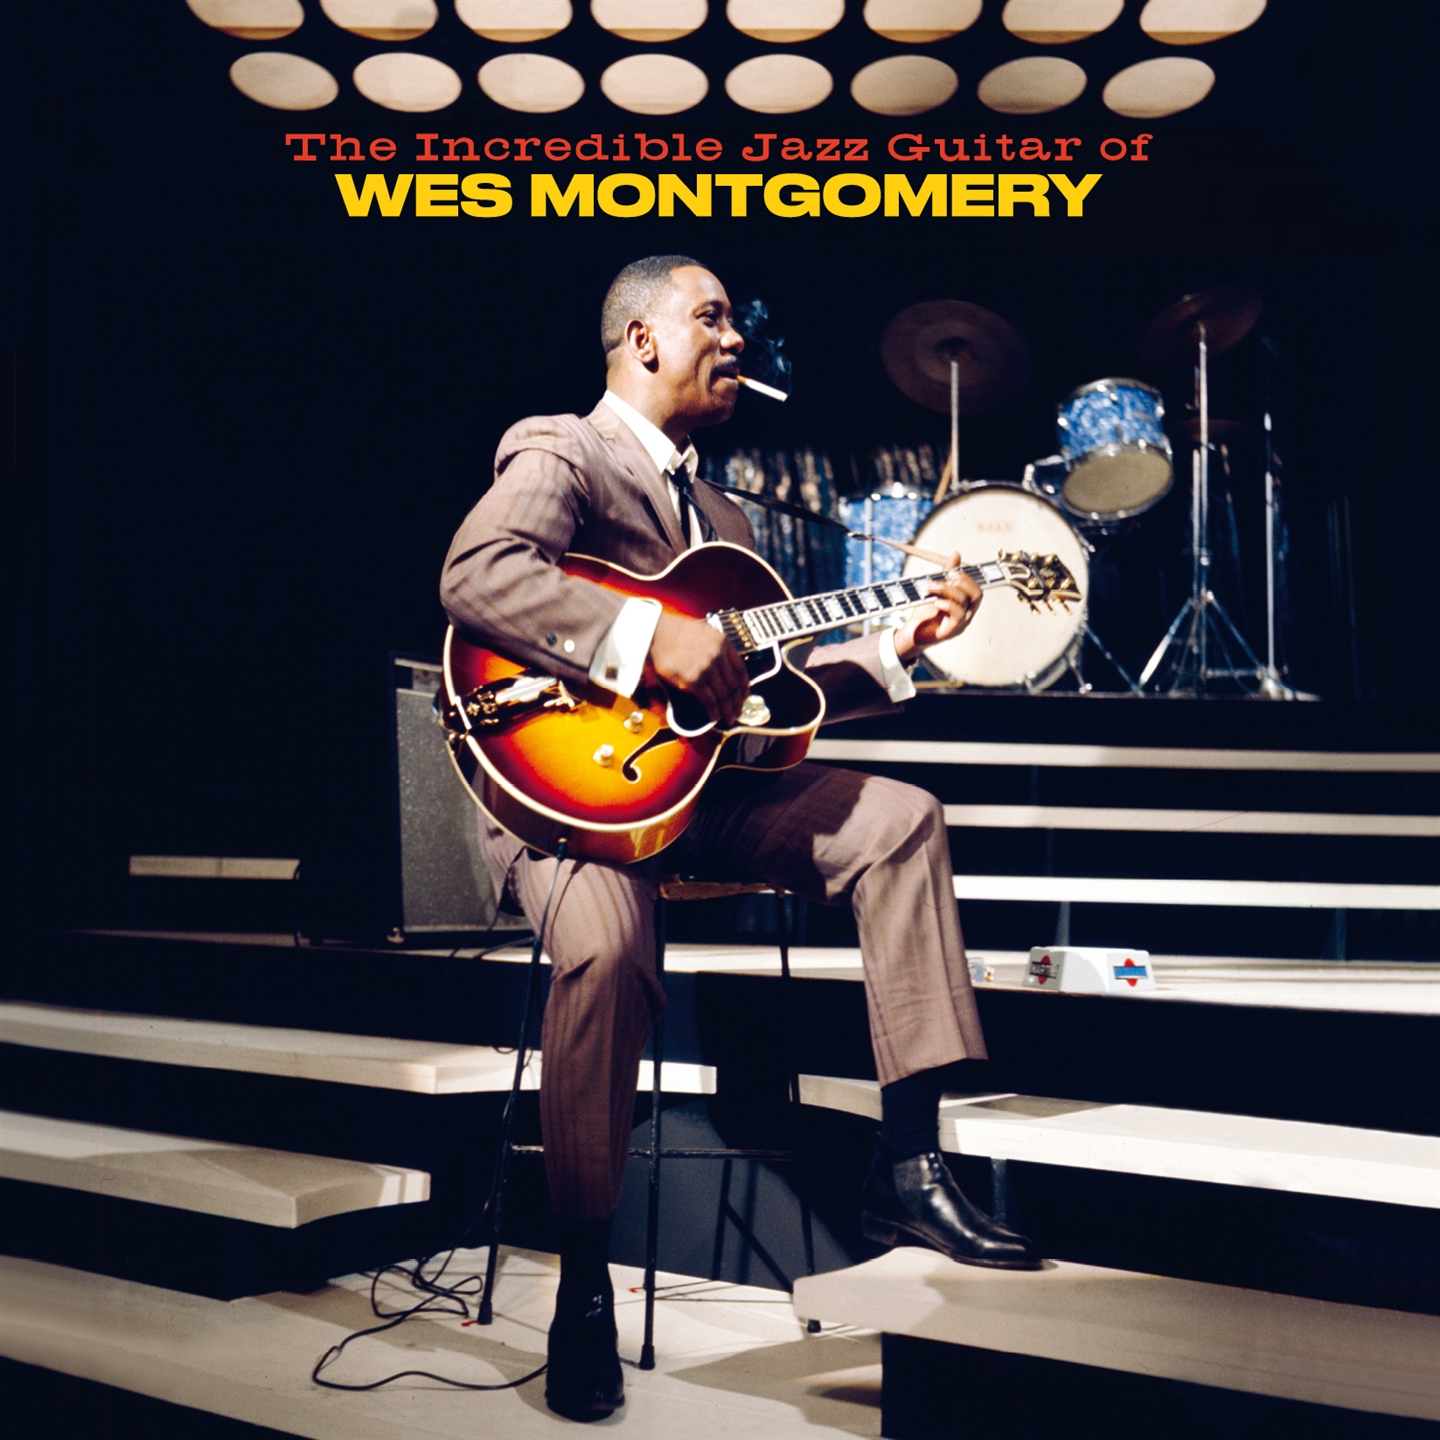 THE INCREDIBLE JAZZ GUITAR OF WES MONTGOMERY